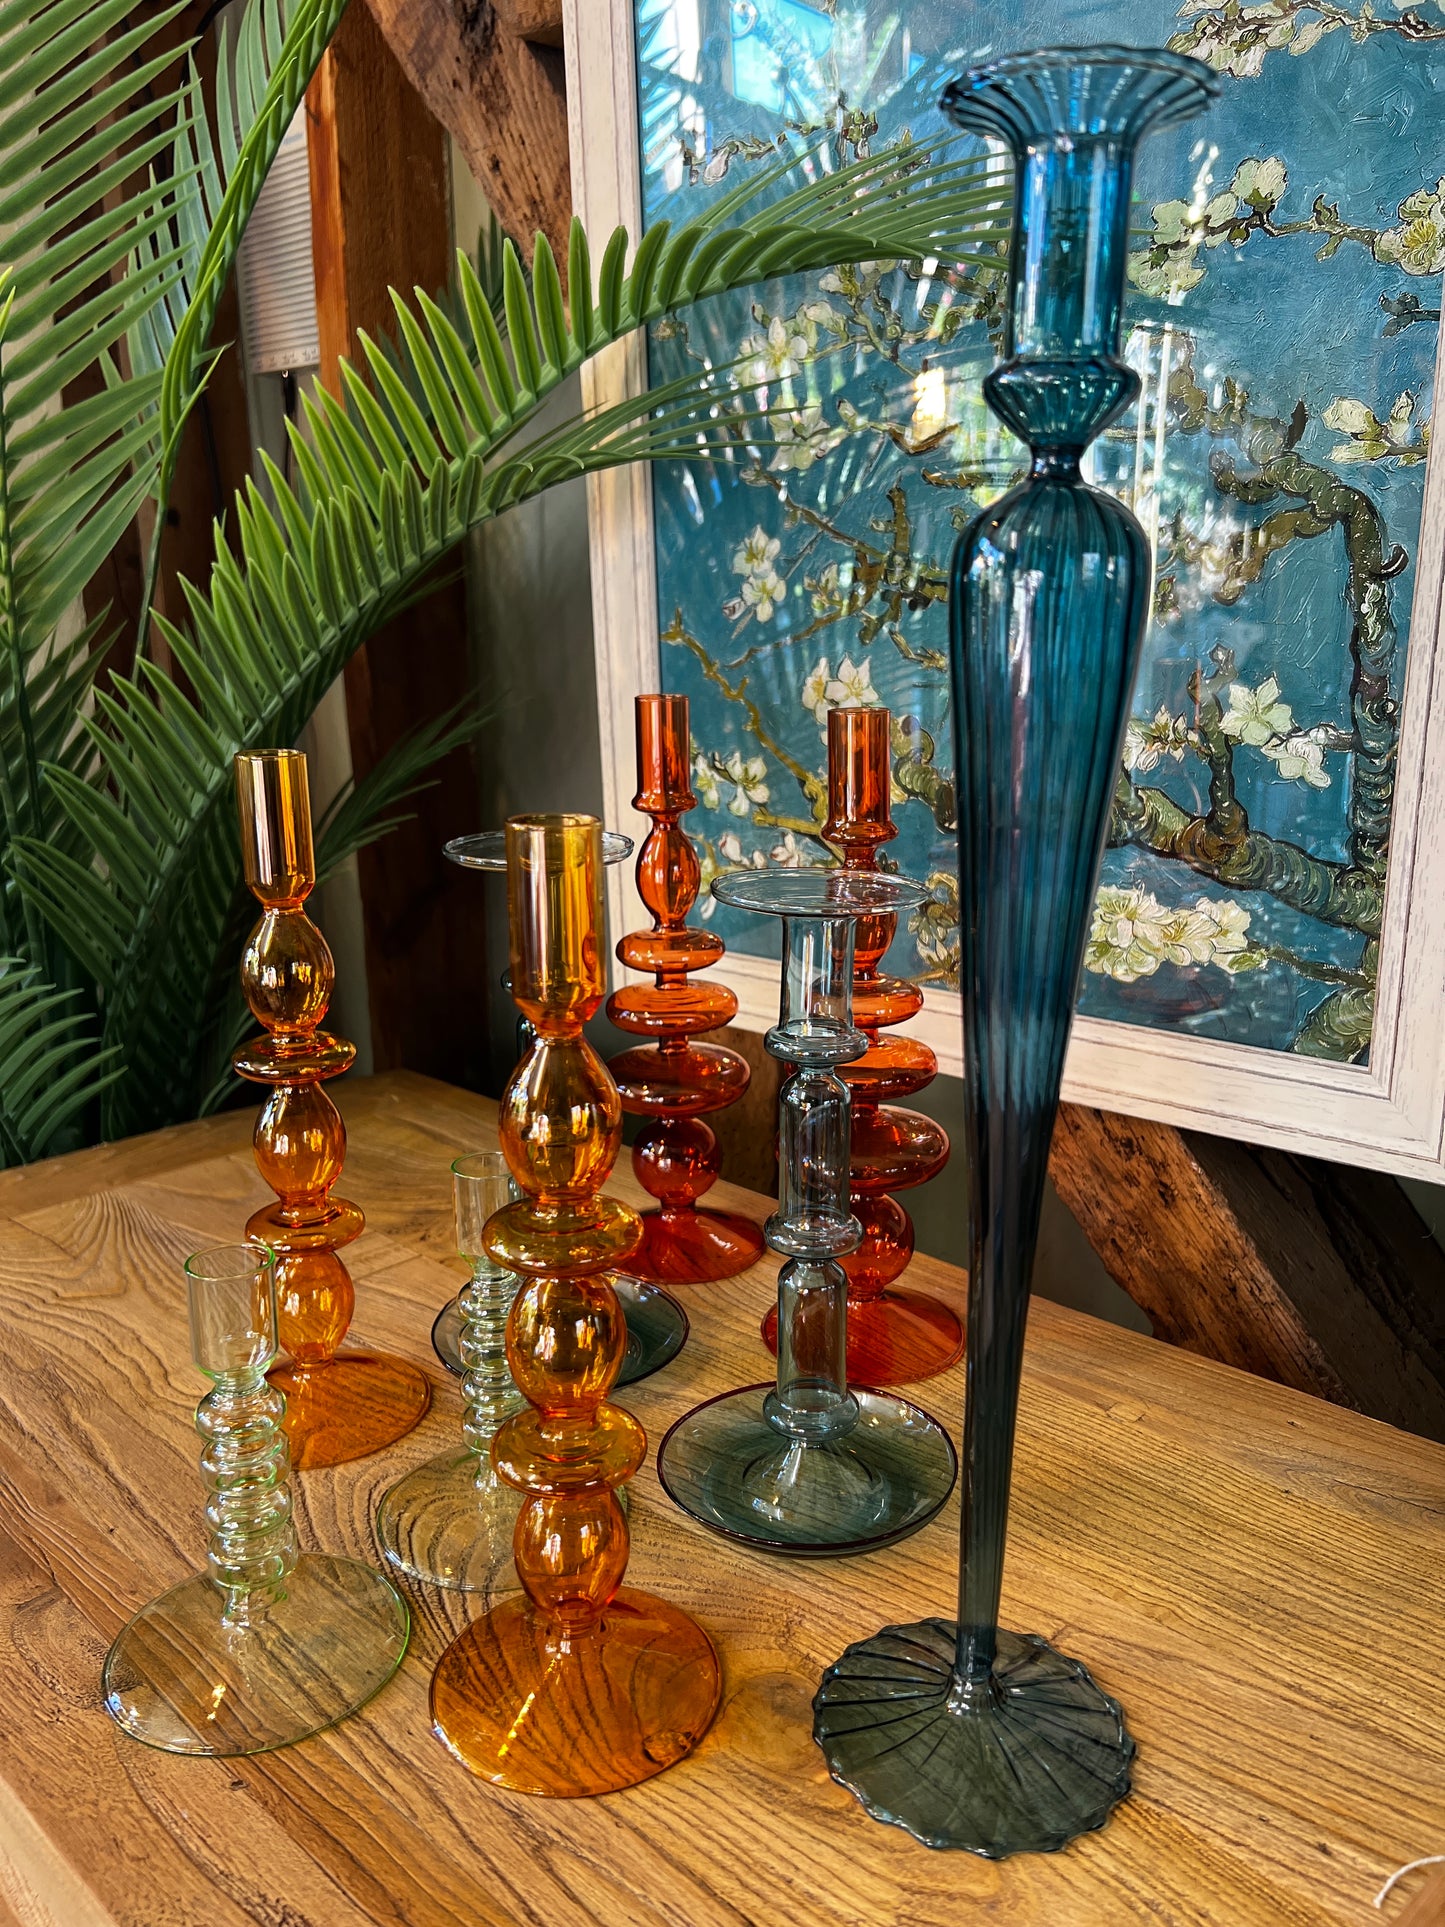 Glass Candle Holder - Tall Blue